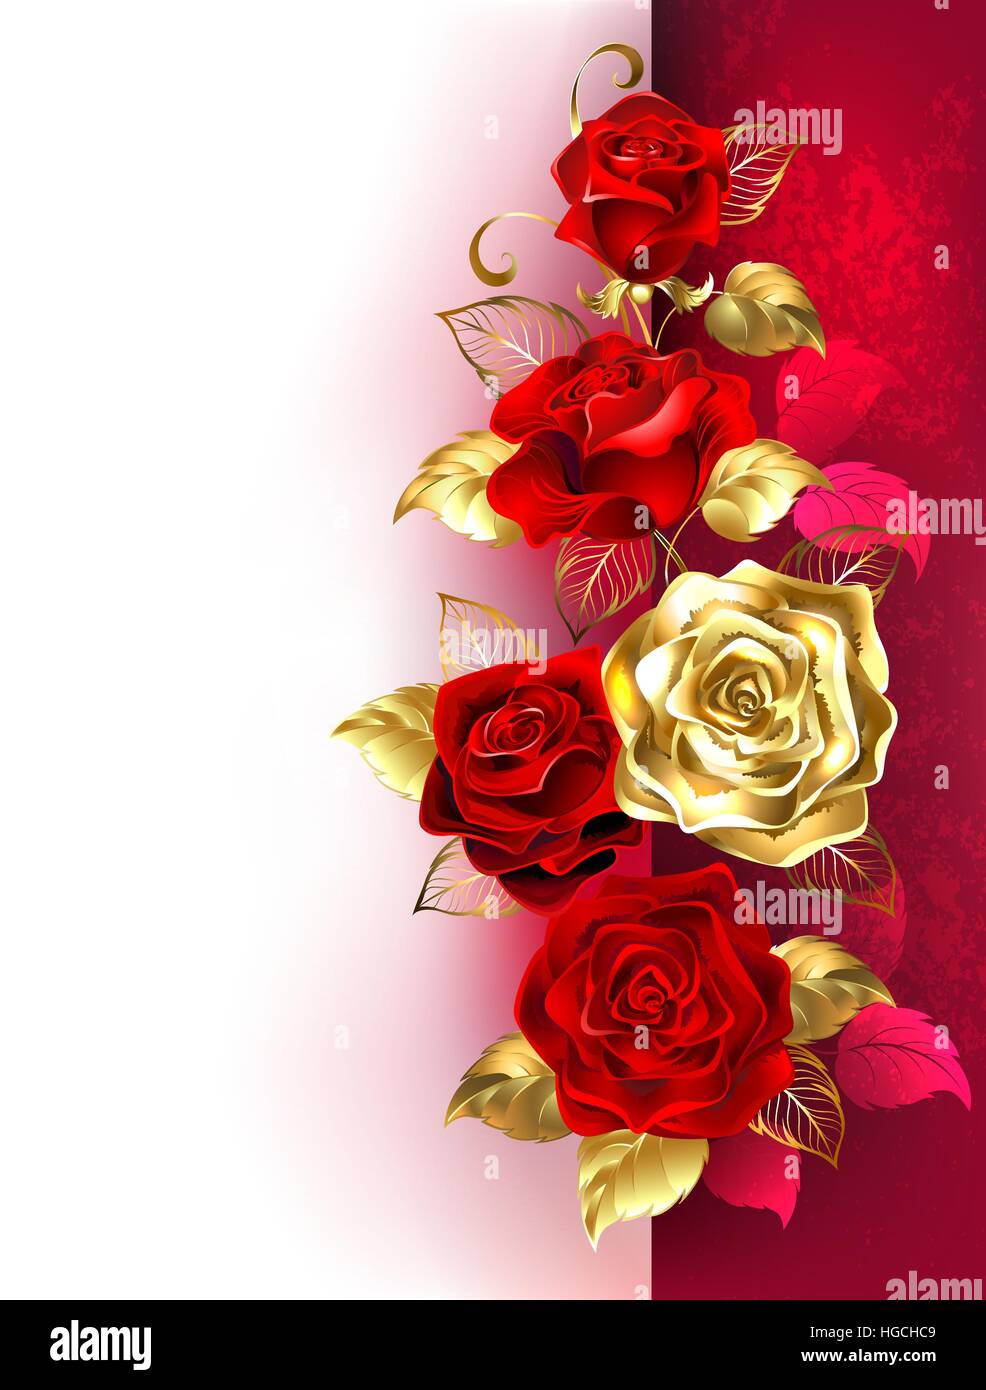 Design with red and gold roses on a white and red background. Design with roses. Stock Vector